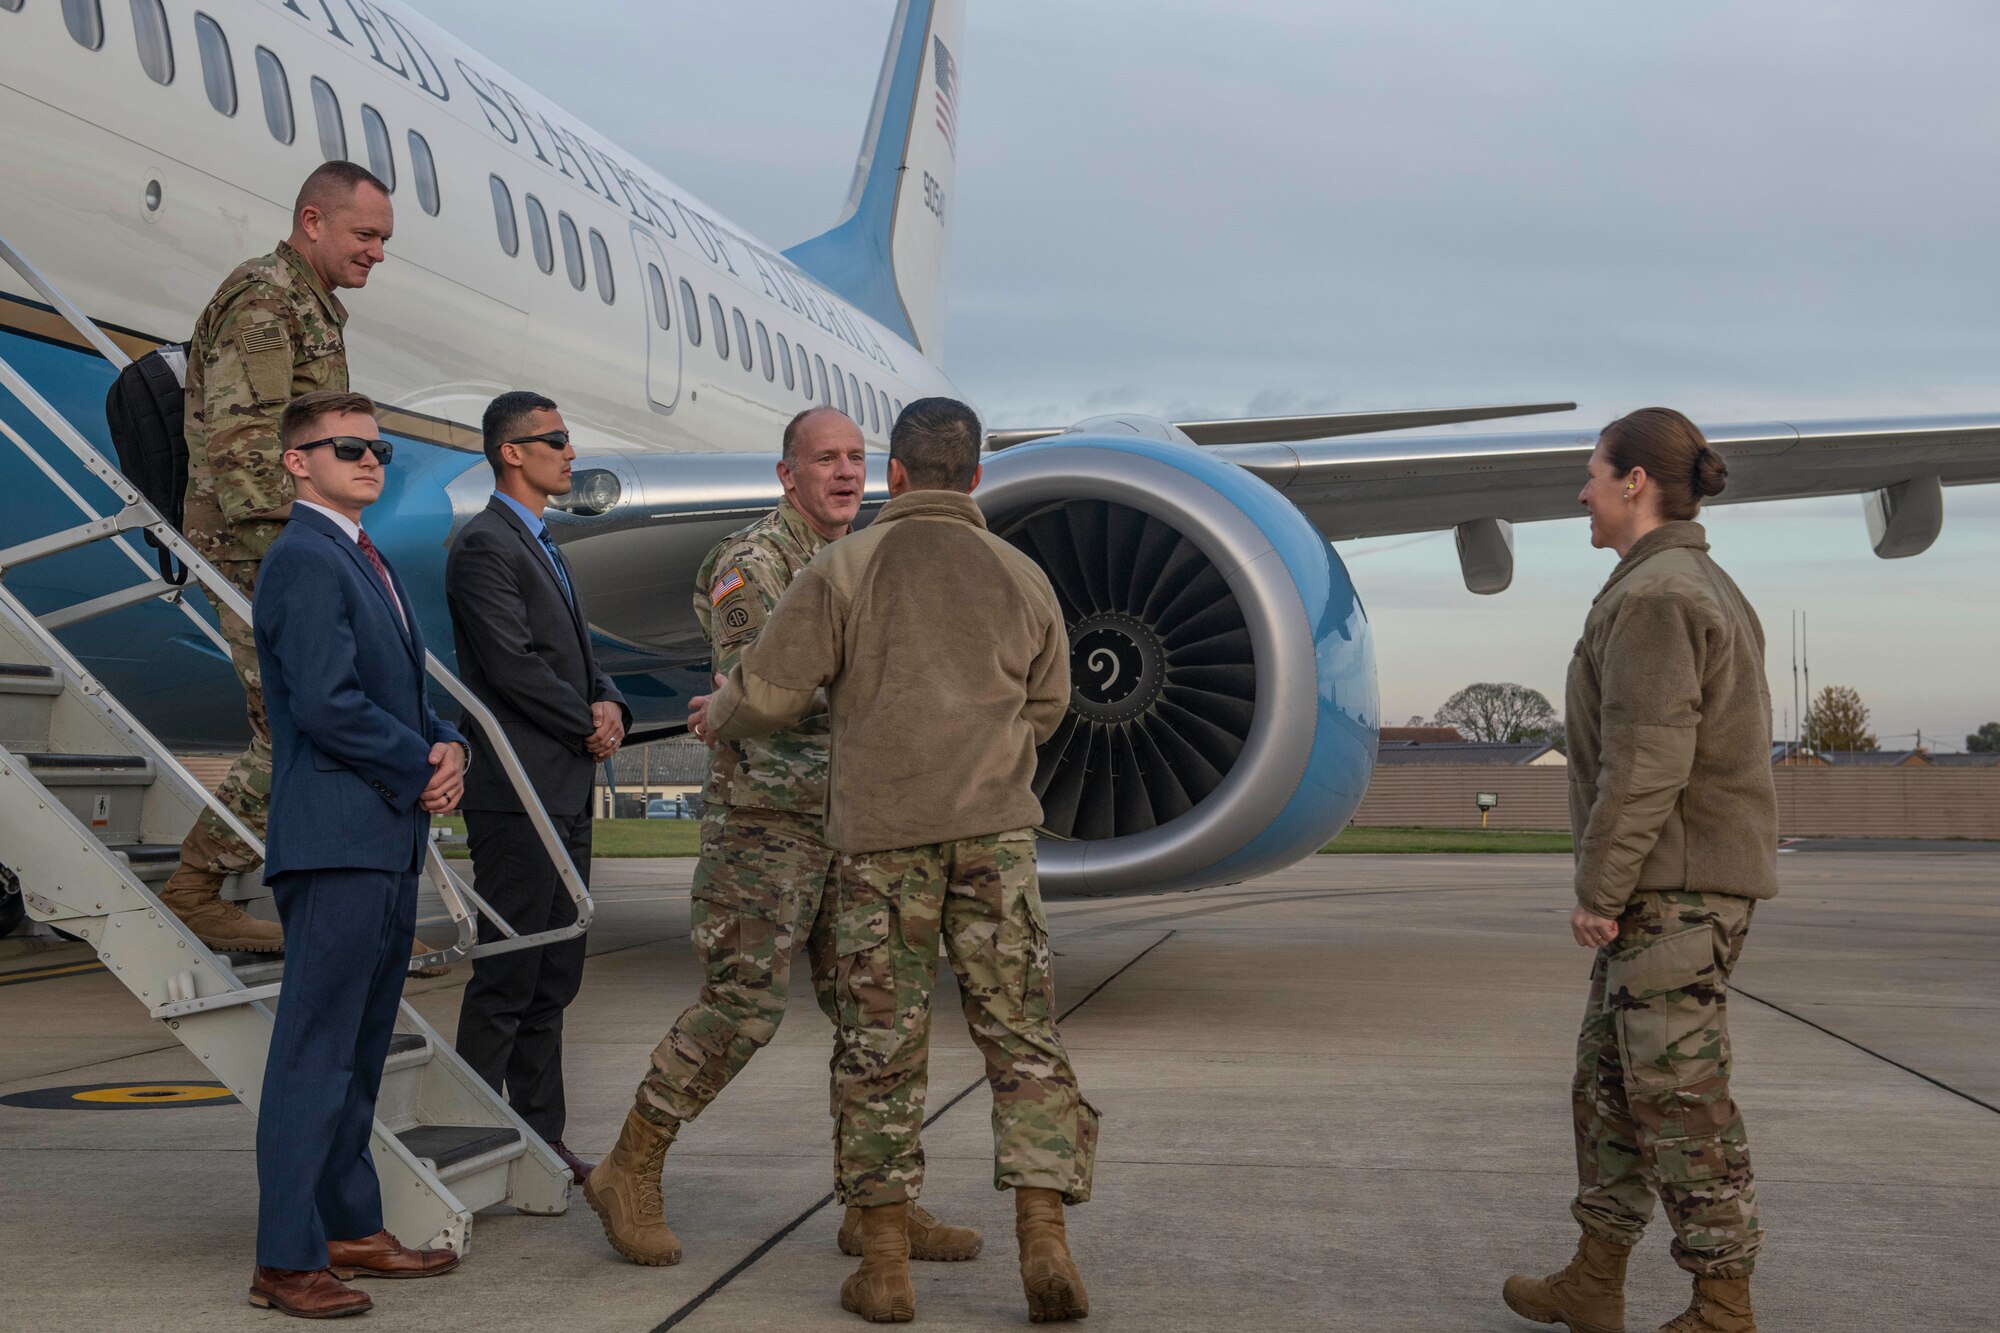 U.S. Army Gen. Stephen Lyons, U.S. Transportation Command commander, is greeted by U.S. Air Force Col. Troy Pananon, 100th Air Refueling Wing commander, at RAF Mildenhall England, Nov. 19, 2019. The 100th ARW directly supports two global combatant commands and is on-call to support three additional commands, including USTRANSCOM. (U.S. Air Force photo by Senior Airman Luke Milano)